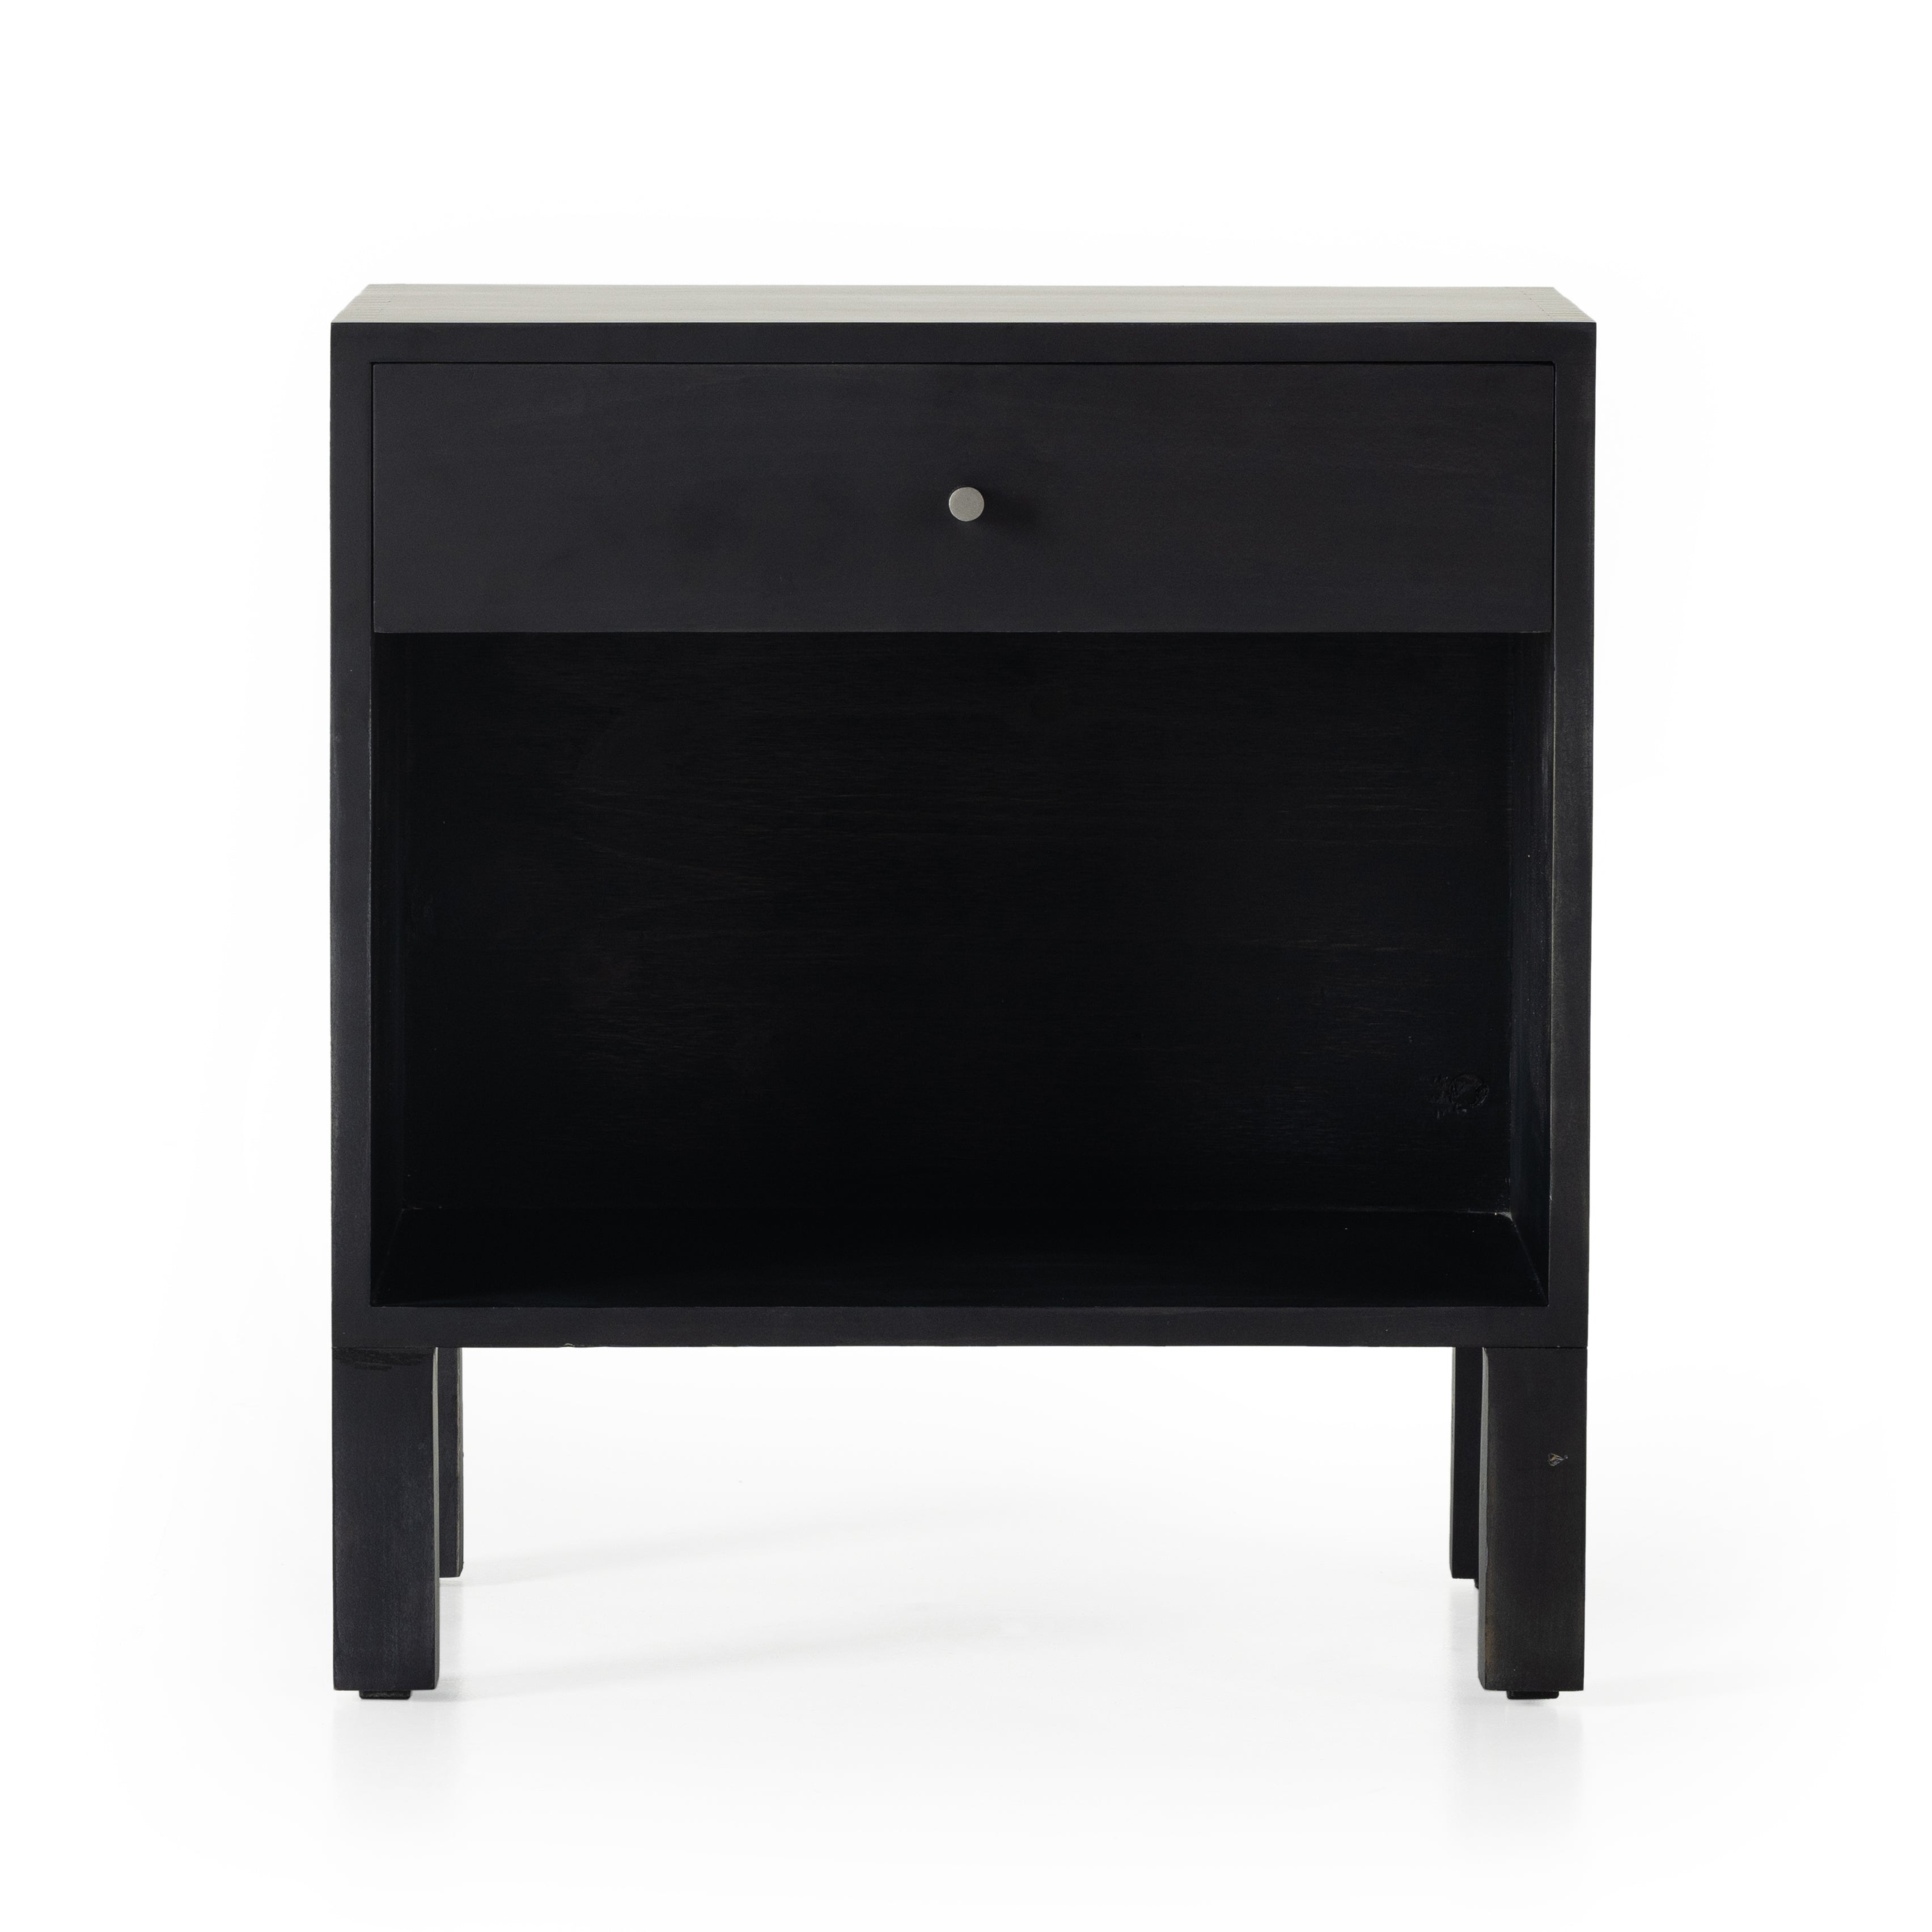 Gather sweet dreams with the Isador Black Wash Poplar Nightstand. The sleek and refined design is perfect for any bedroom. The rich black wash finish creates a timeless look, sure to add elegance and comfort to any décor. Amethyst Home provides interior design, new construction, custom furniture, and area rugs in the Washington metro area.